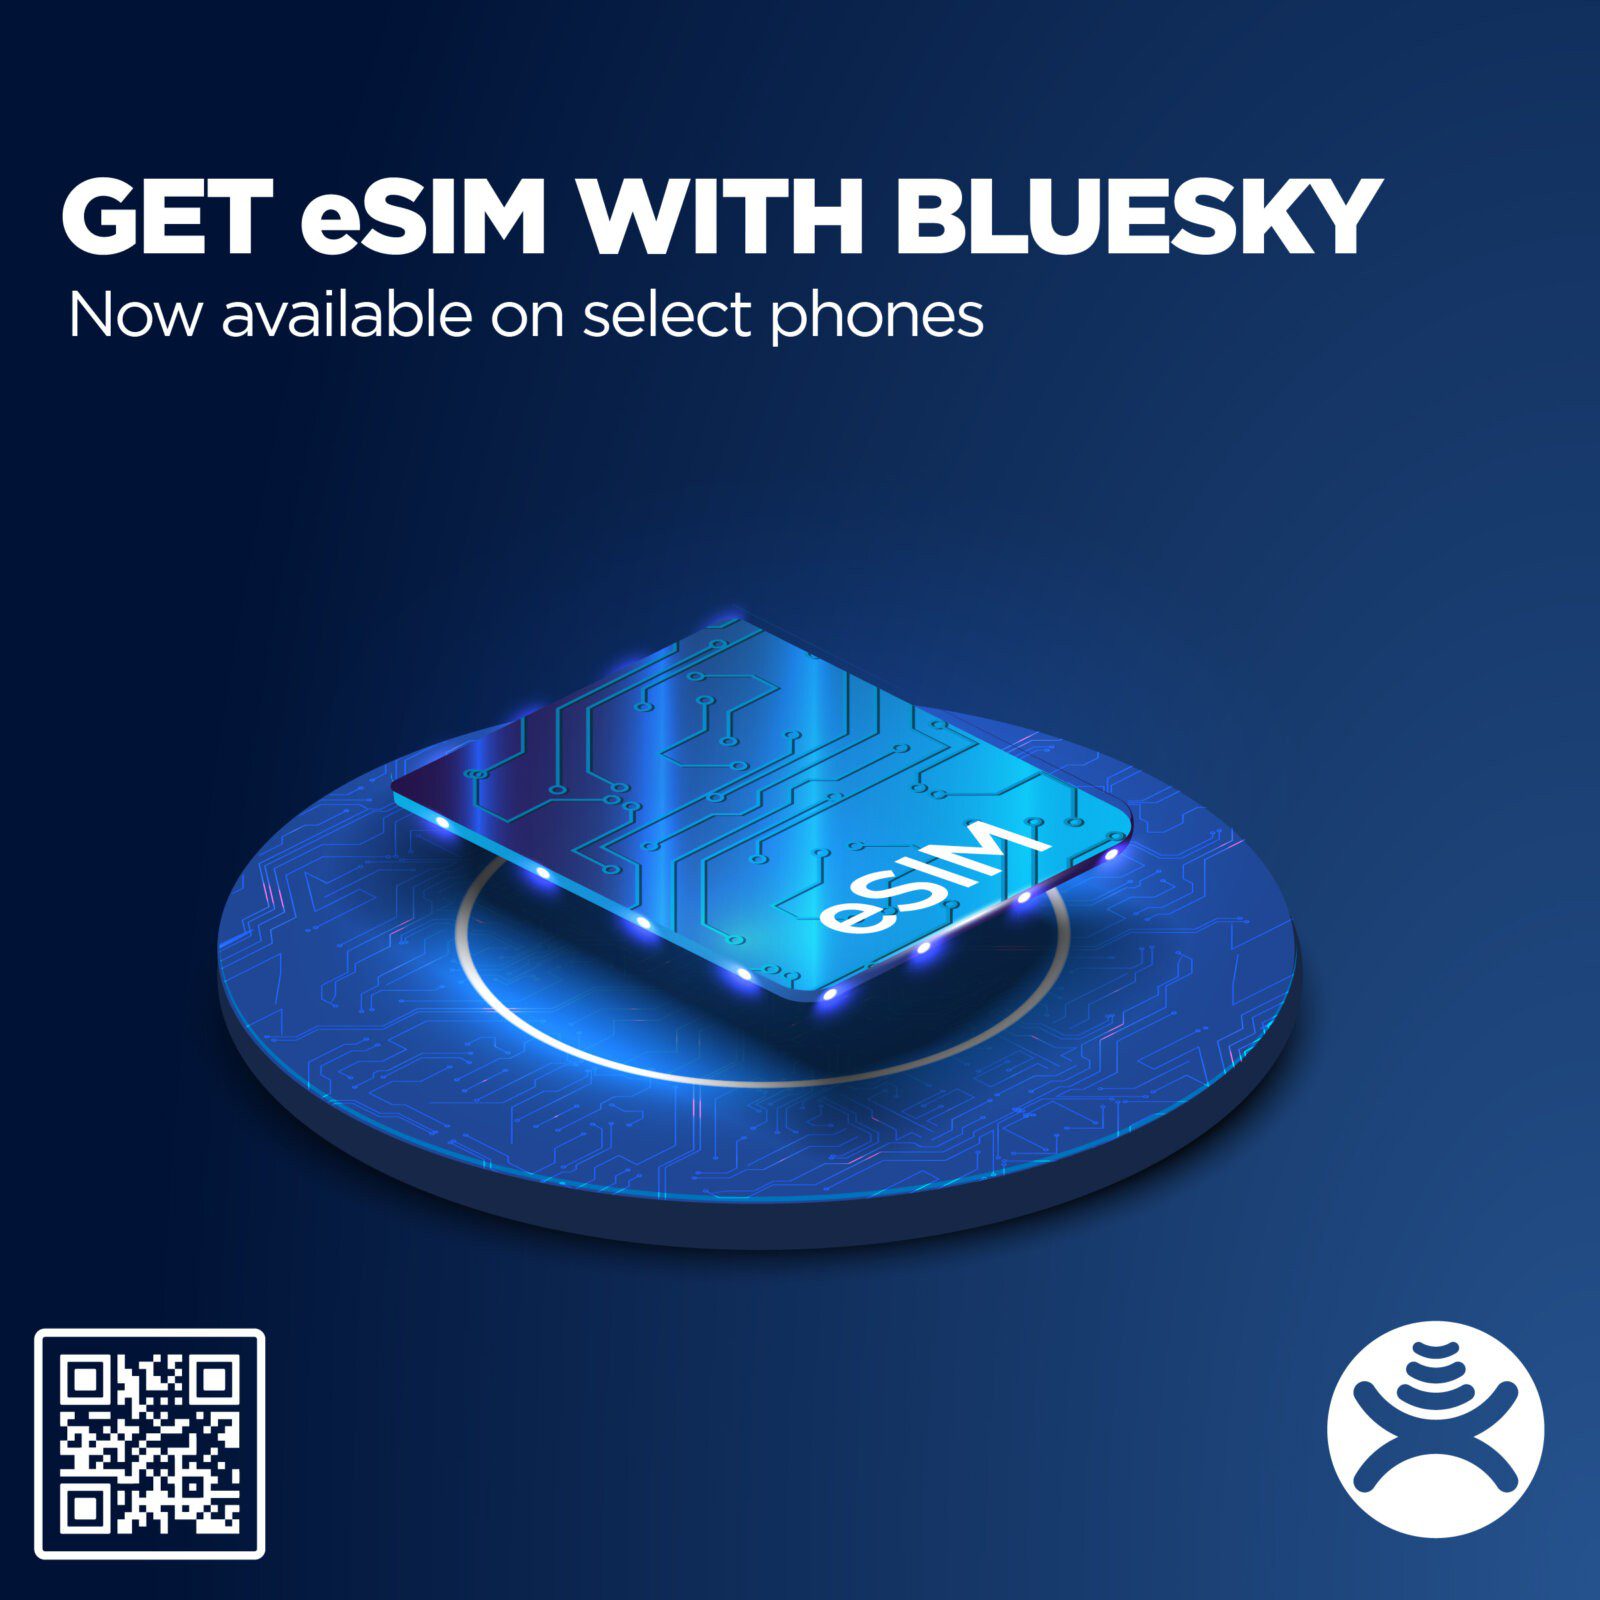 Bluesky American Samoa - WIN YOURSELF A PS5 with our Speednet Data  Promotion happening NOW! Simply eCharge the exact value of the speednet  data bundle of your choice & automatically go into